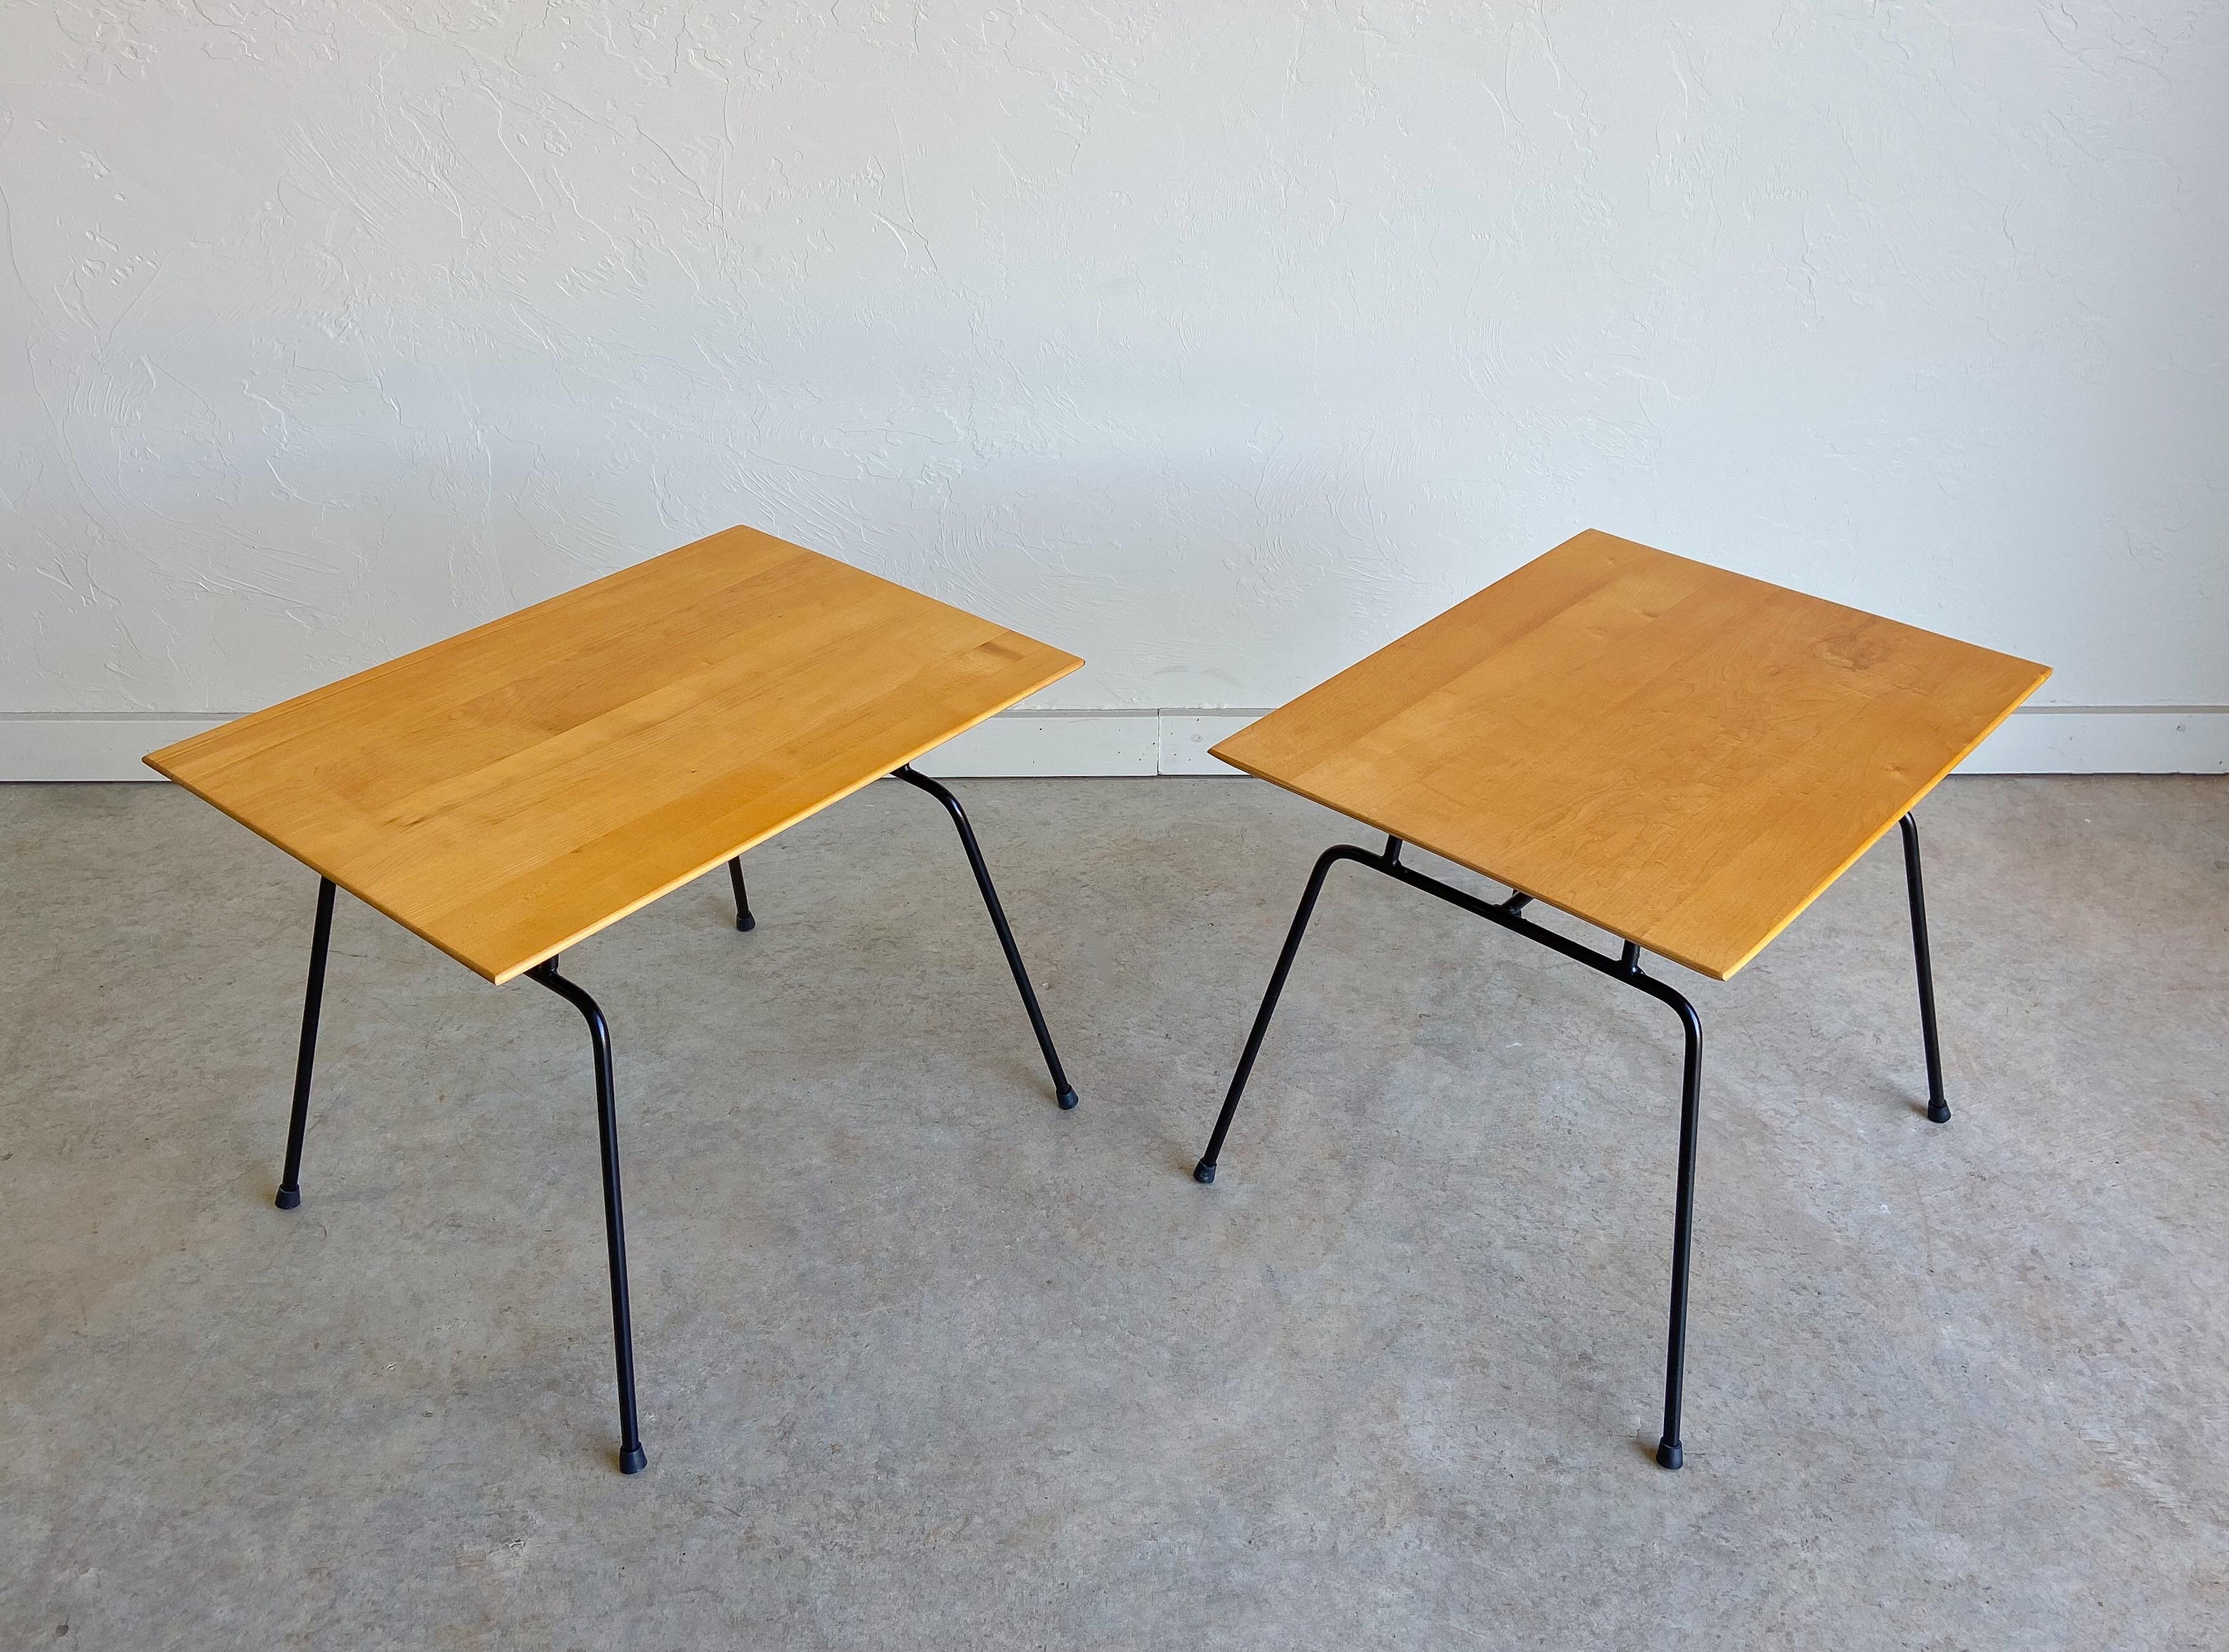 An early pair of Paul McCobb iron and birch side or occasional tables designed for Winchendon Furniture in the 1950's.

These are fantastic examples of early American modern design. McCobb's Planner Group line of furniture was both aesthetic and